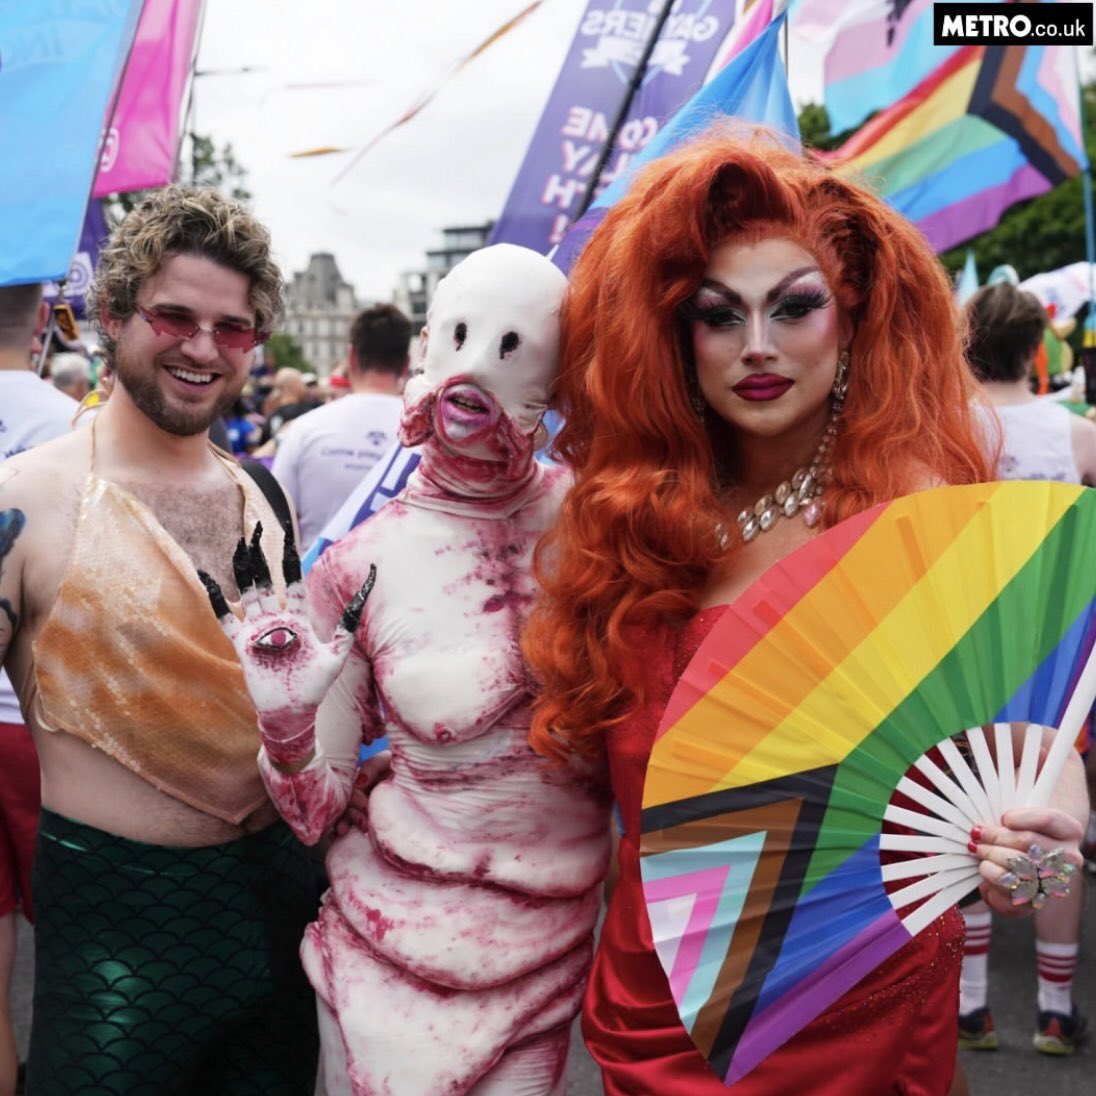 . @realgdt’s pale man spotted at #prideinlondon 🖐🏻👄🤚🏻